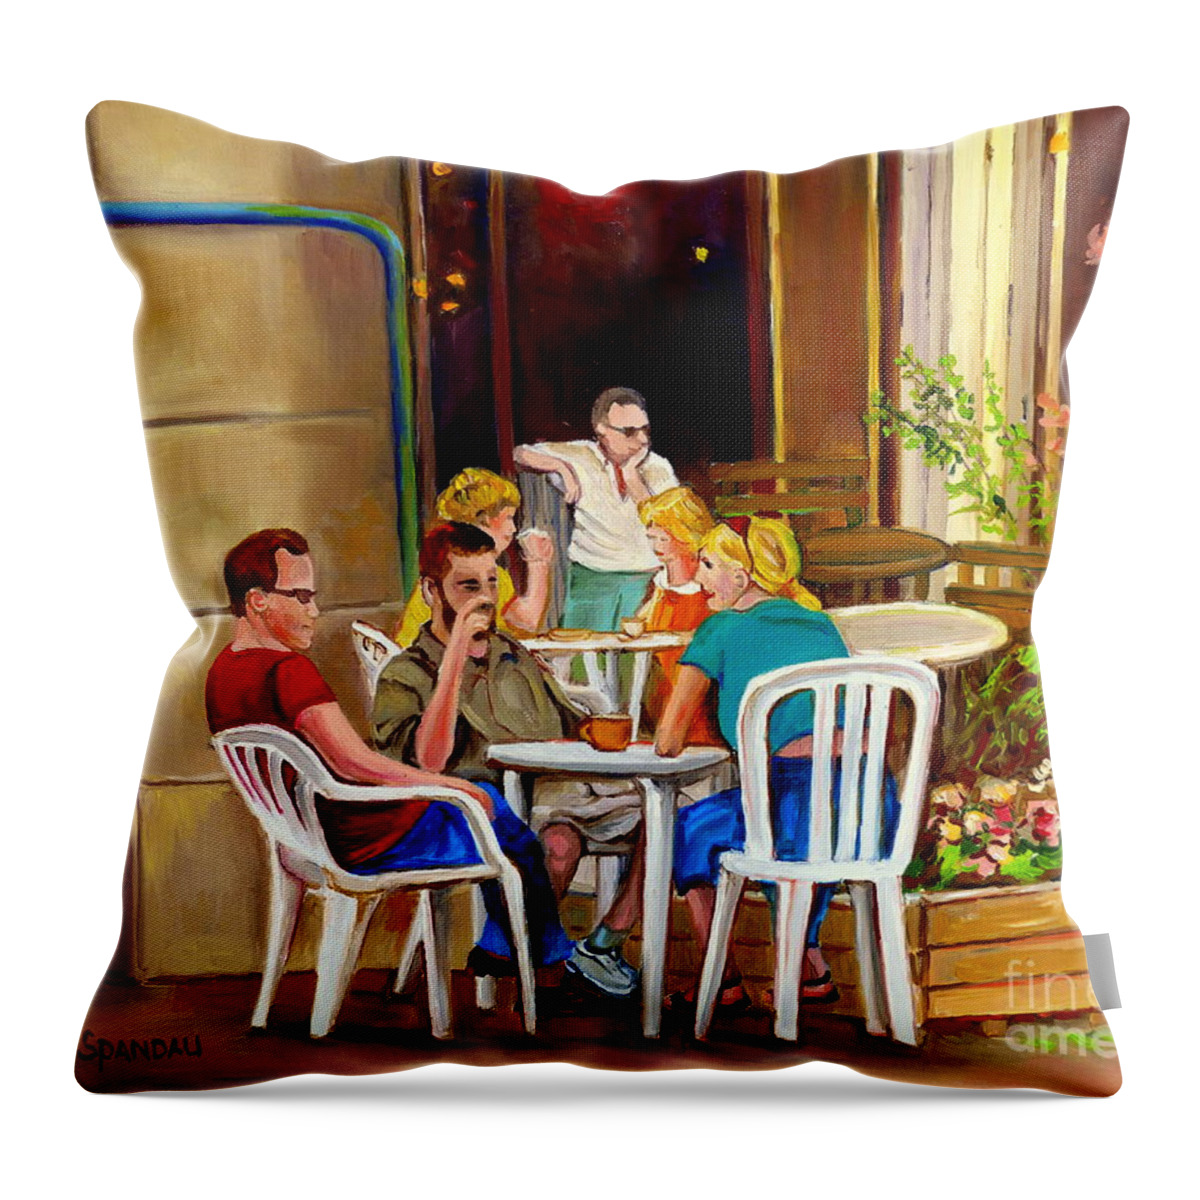 Montreal Throw Pillow featuring the painting Open Air Cafe Parisian Style Bistro-rue St Denis Montreal Cafe Paintings Carole Spandau by Carole Spandau